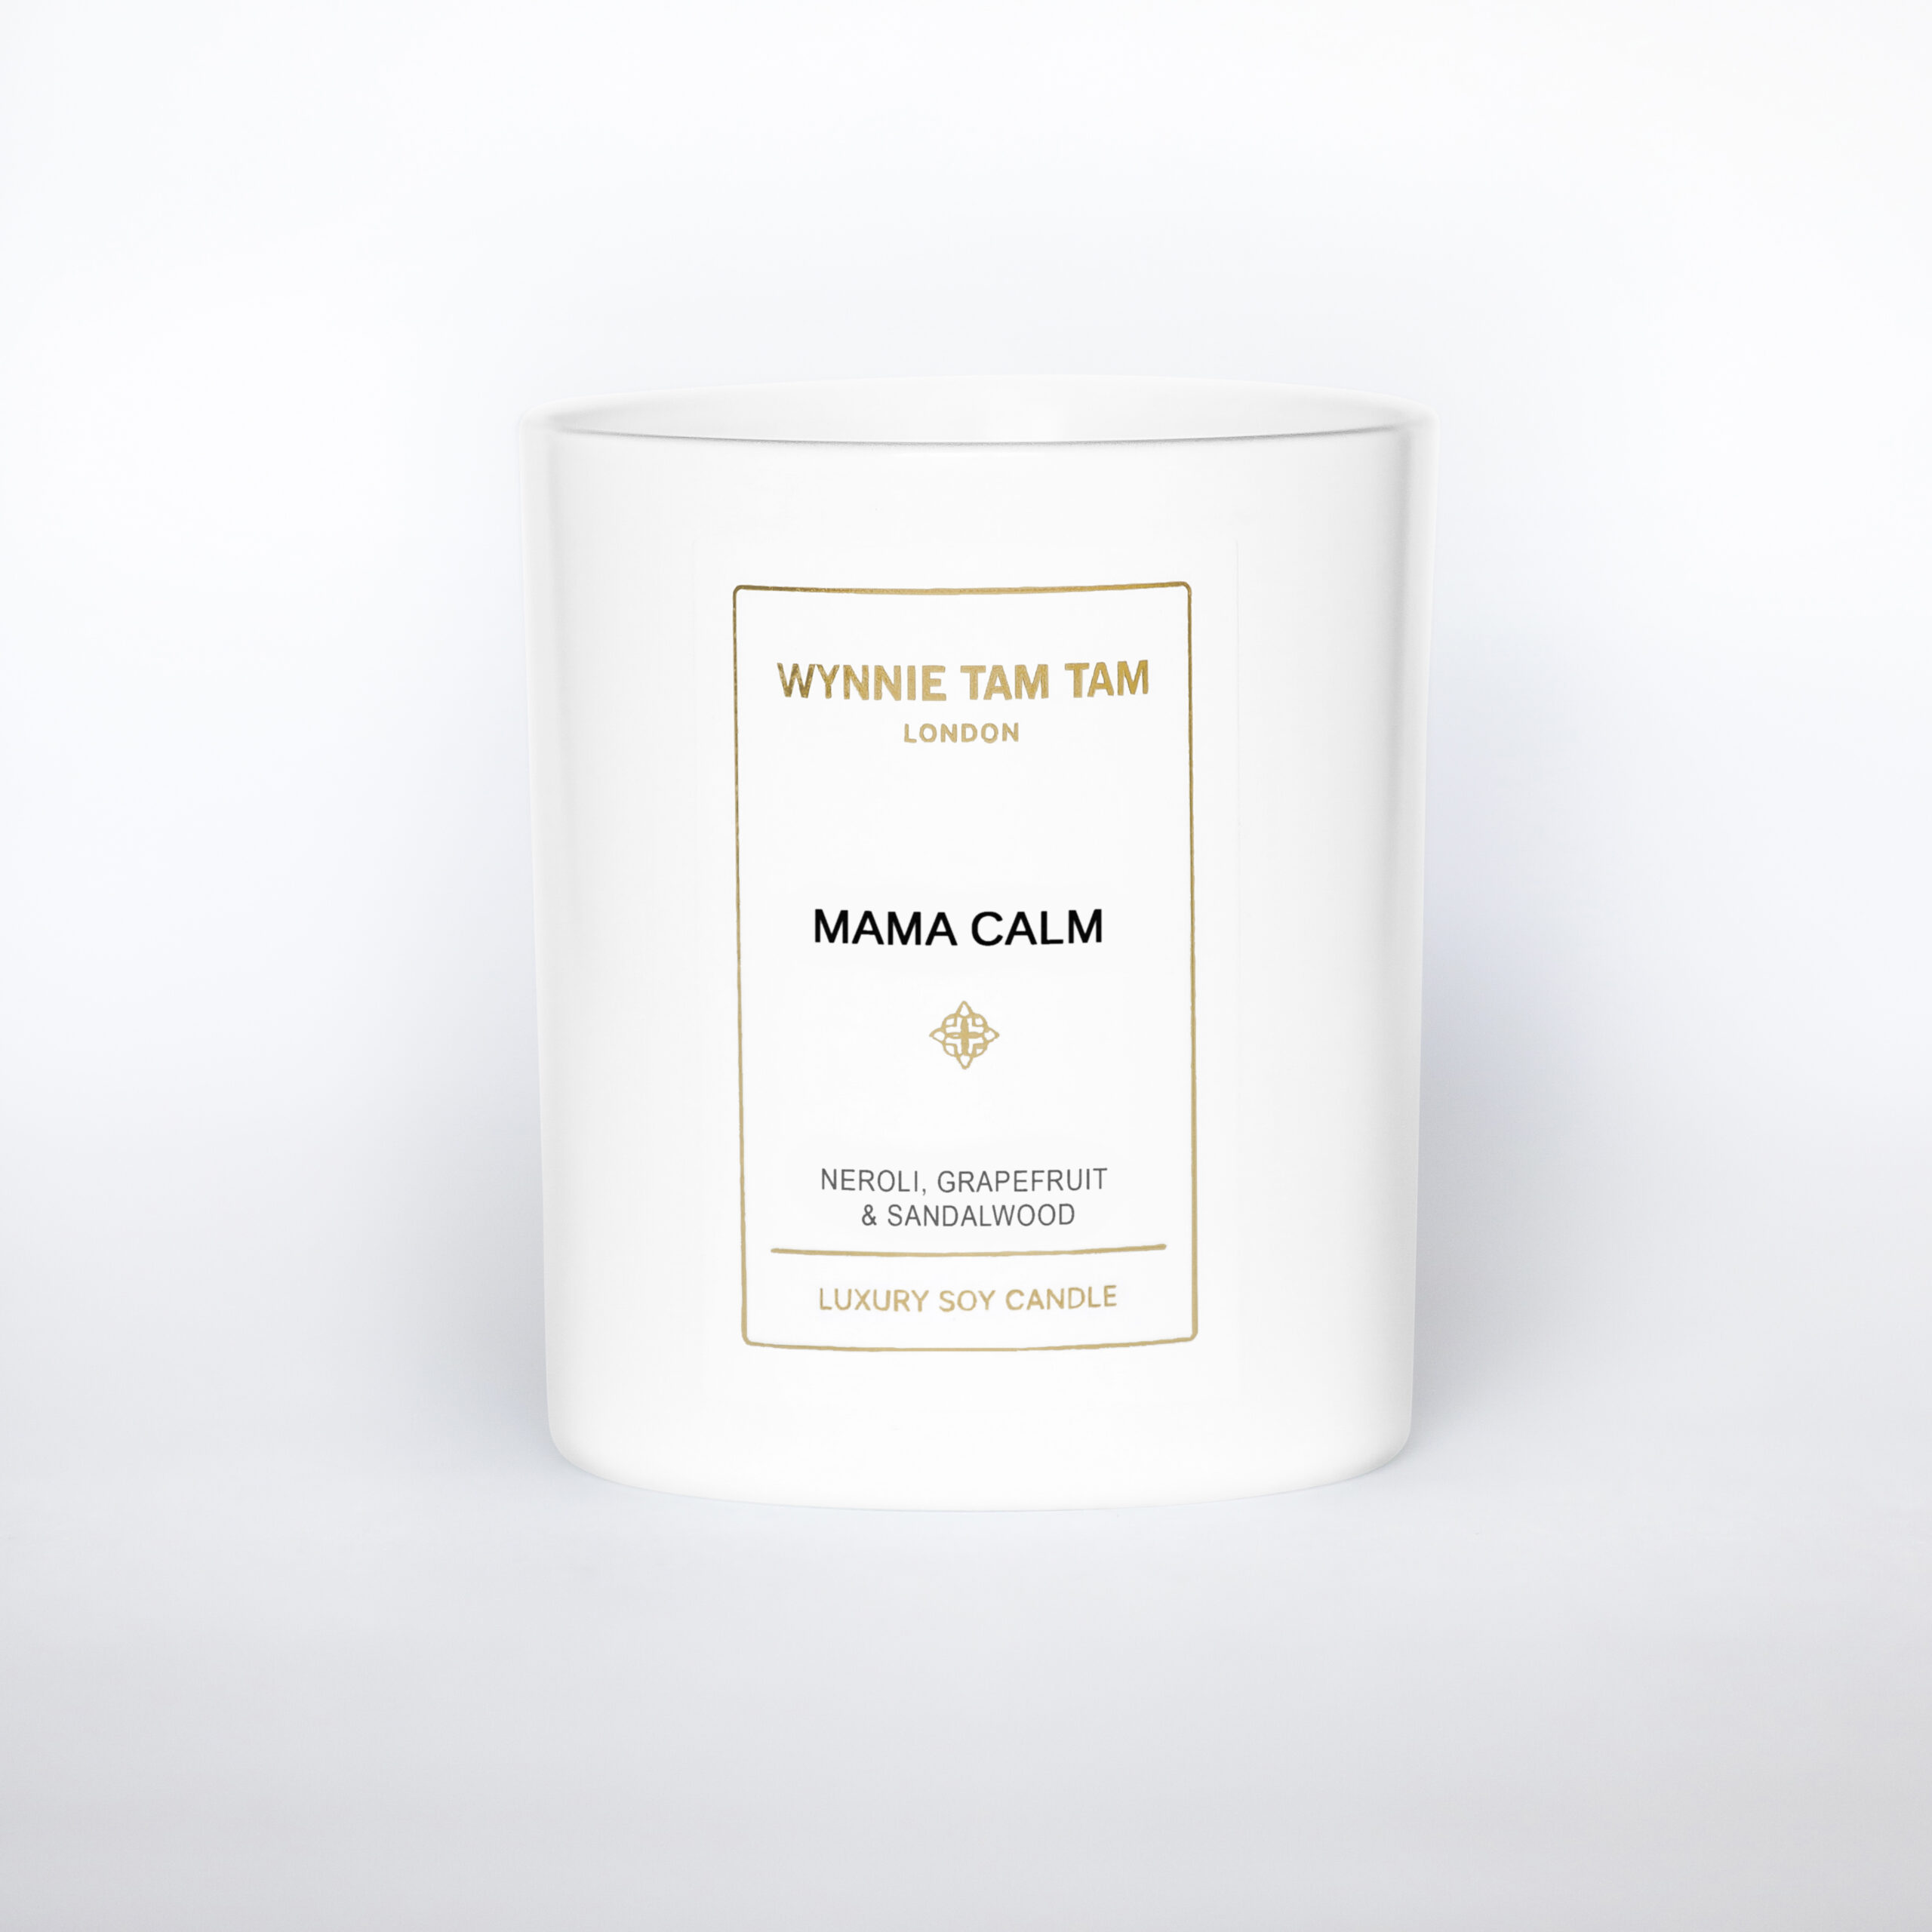 Wellness candles for MAMA